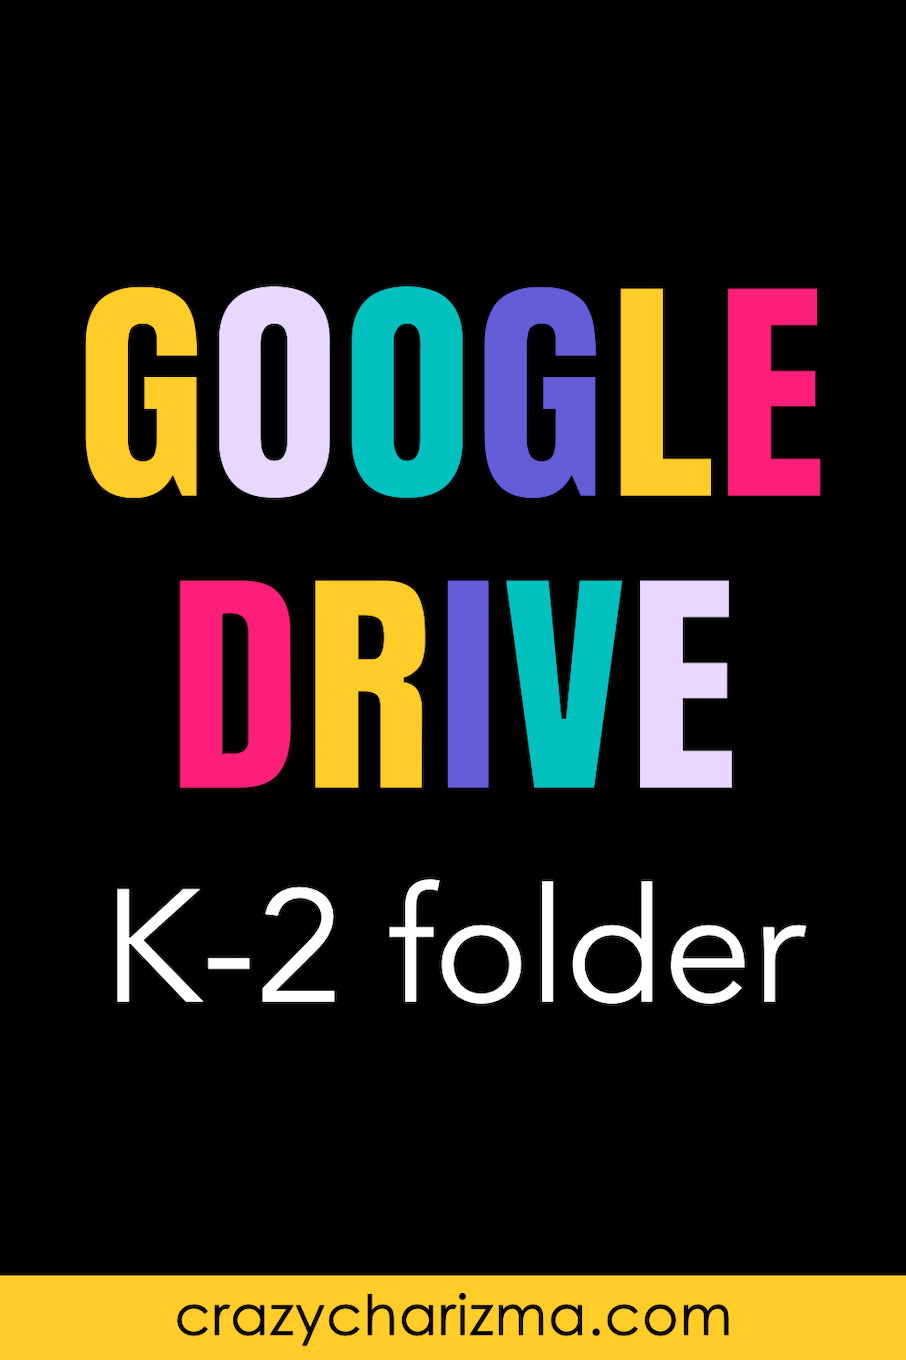 The treasure of resources for Google Classroom and endless opportunities. Grab 4000+ slides of K-2 resources inside this Google Drive folder.